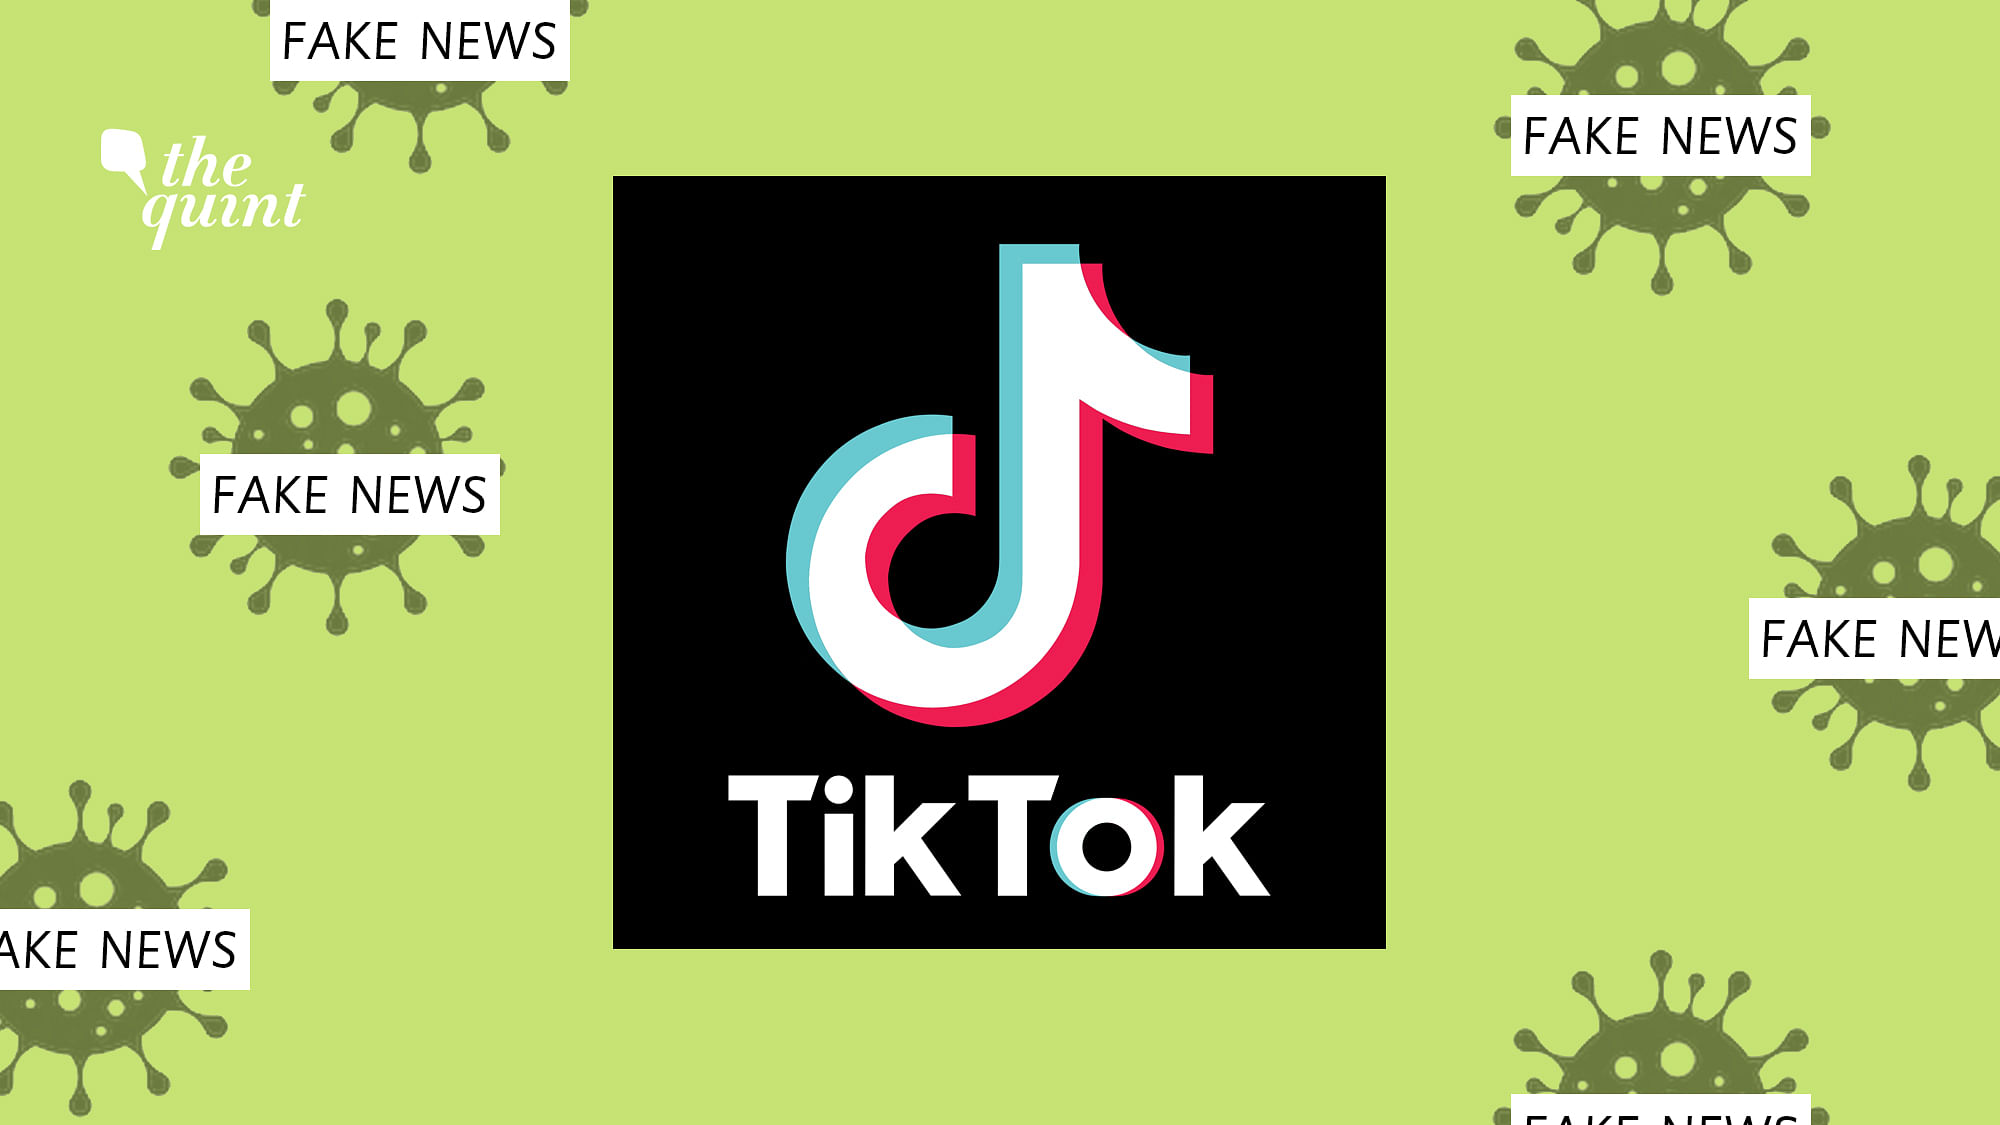 A recent study found that TikTok had seen a surge in fake videos aimed at misleading Indian Muslims over COVID-19.